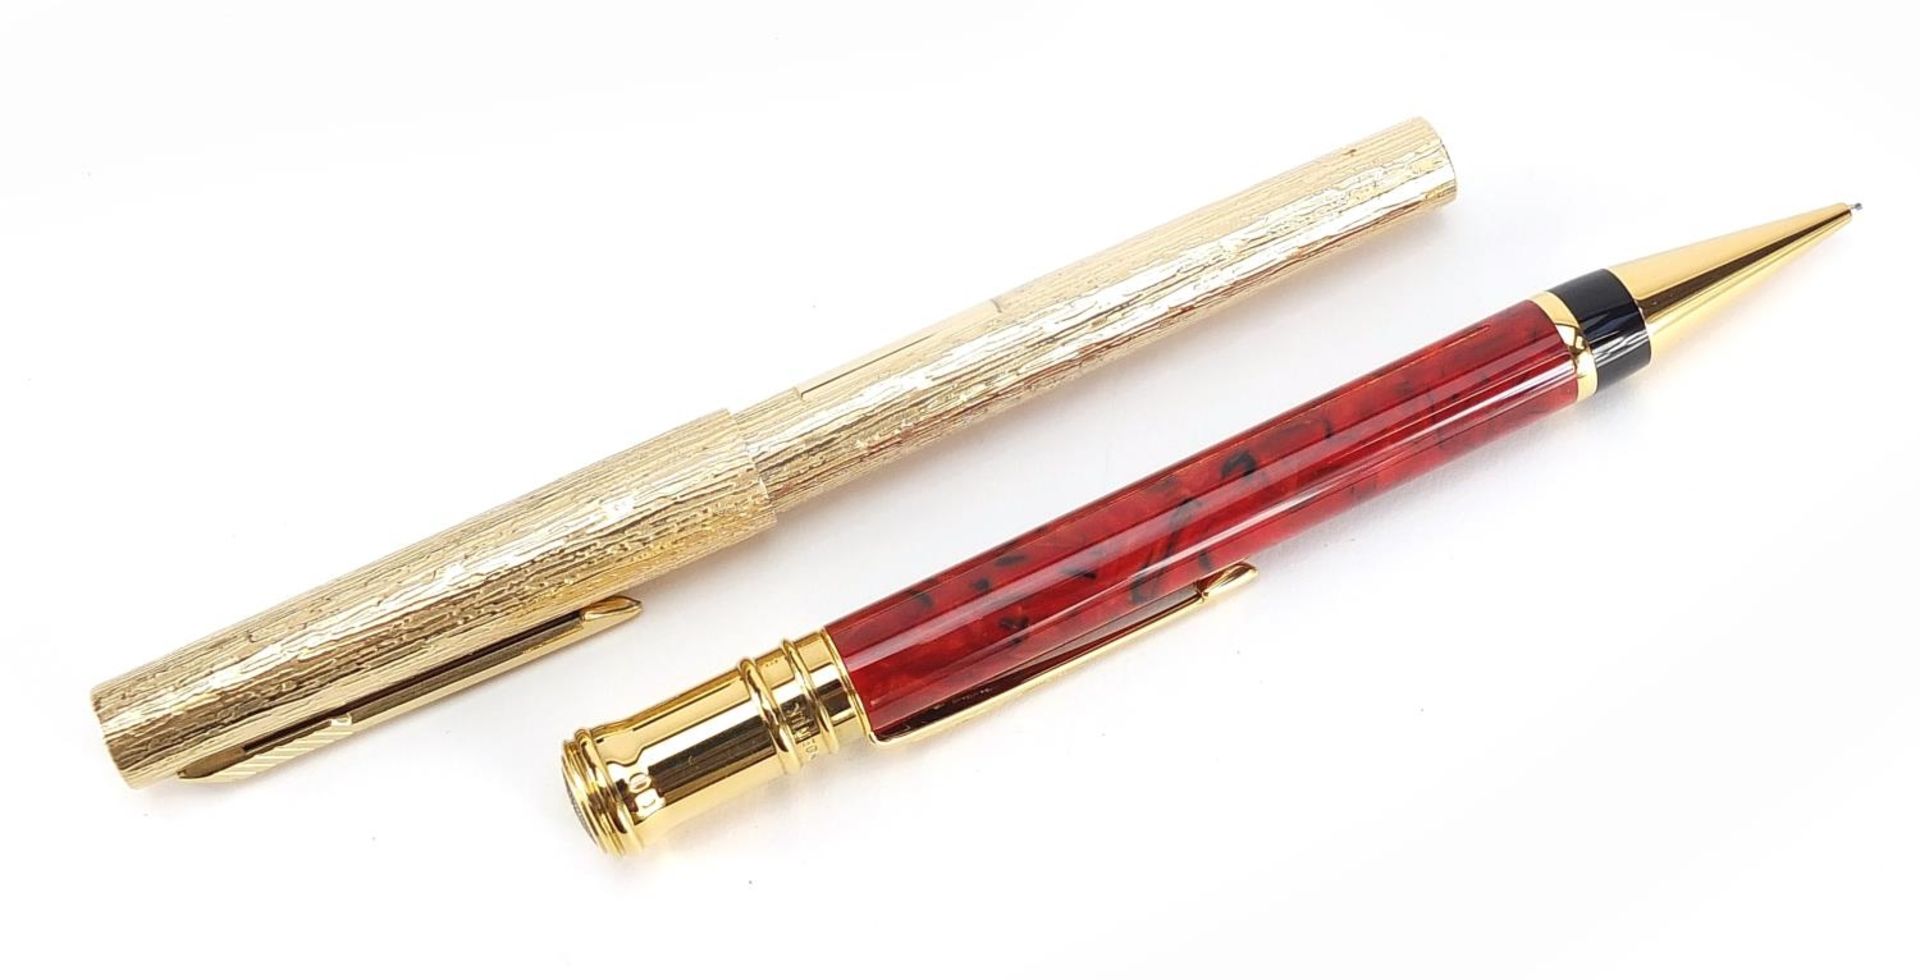 Parker Duofold red marbleised propelling pencil with case and a gold plated bark design fountain pen - Image 5 of 6